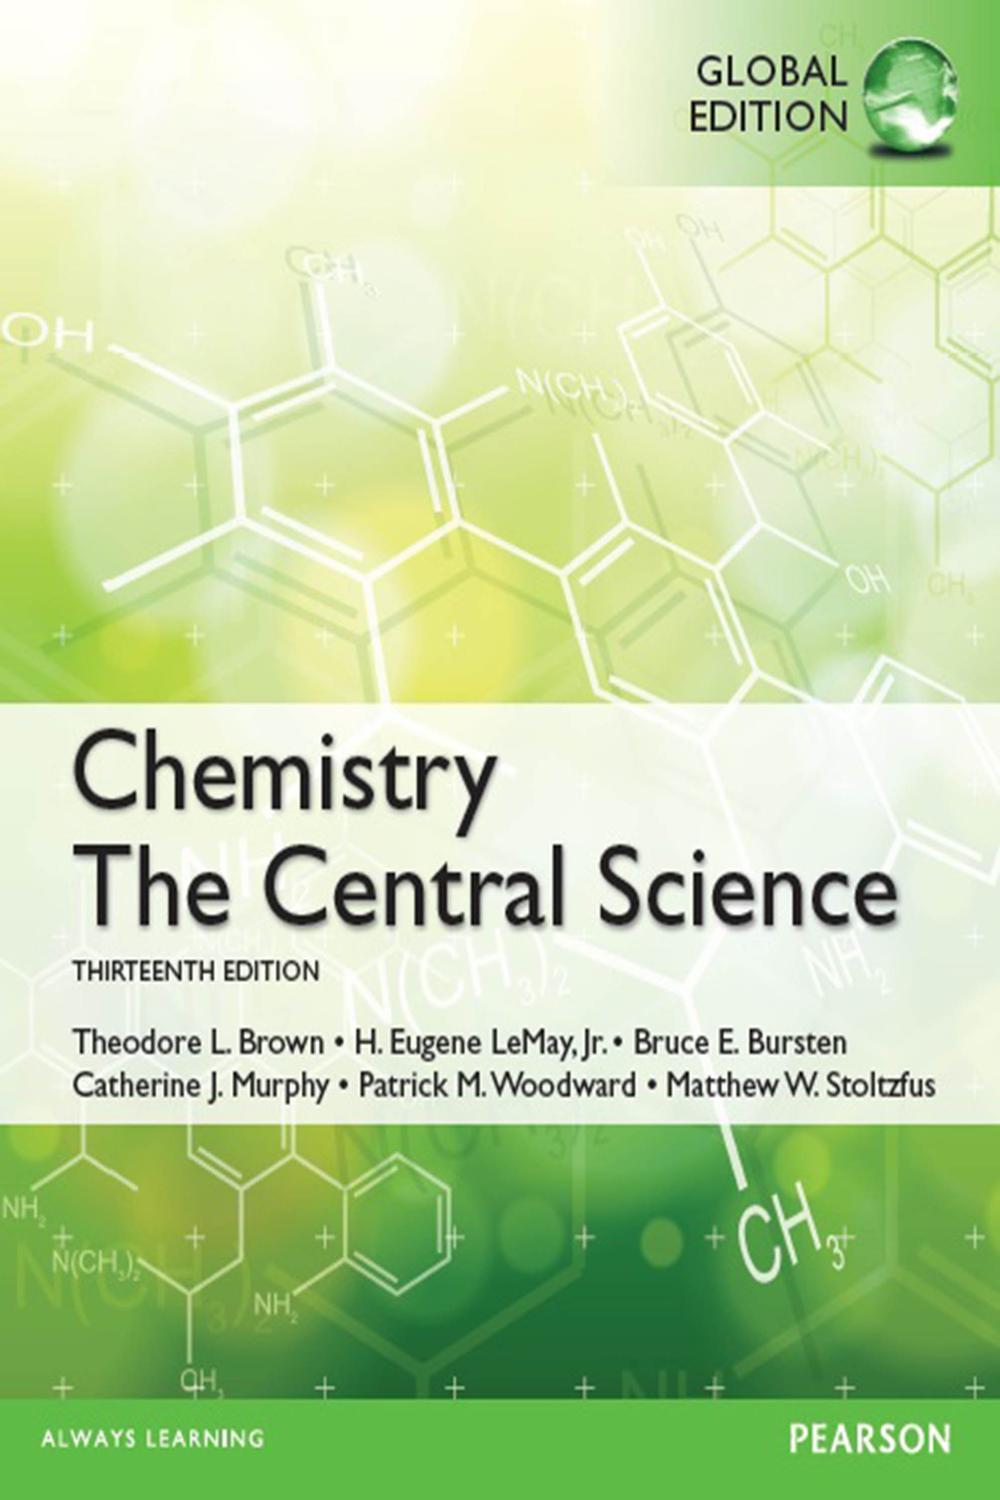 Chemistry the central science 14th edition brown lemay and bursten Pdf Chemistry The Central Science Global Edition By Theodore E Brown H Eugene Lemay Bruce E Bursten Catherine Murphy Patrick Woodward Perlego